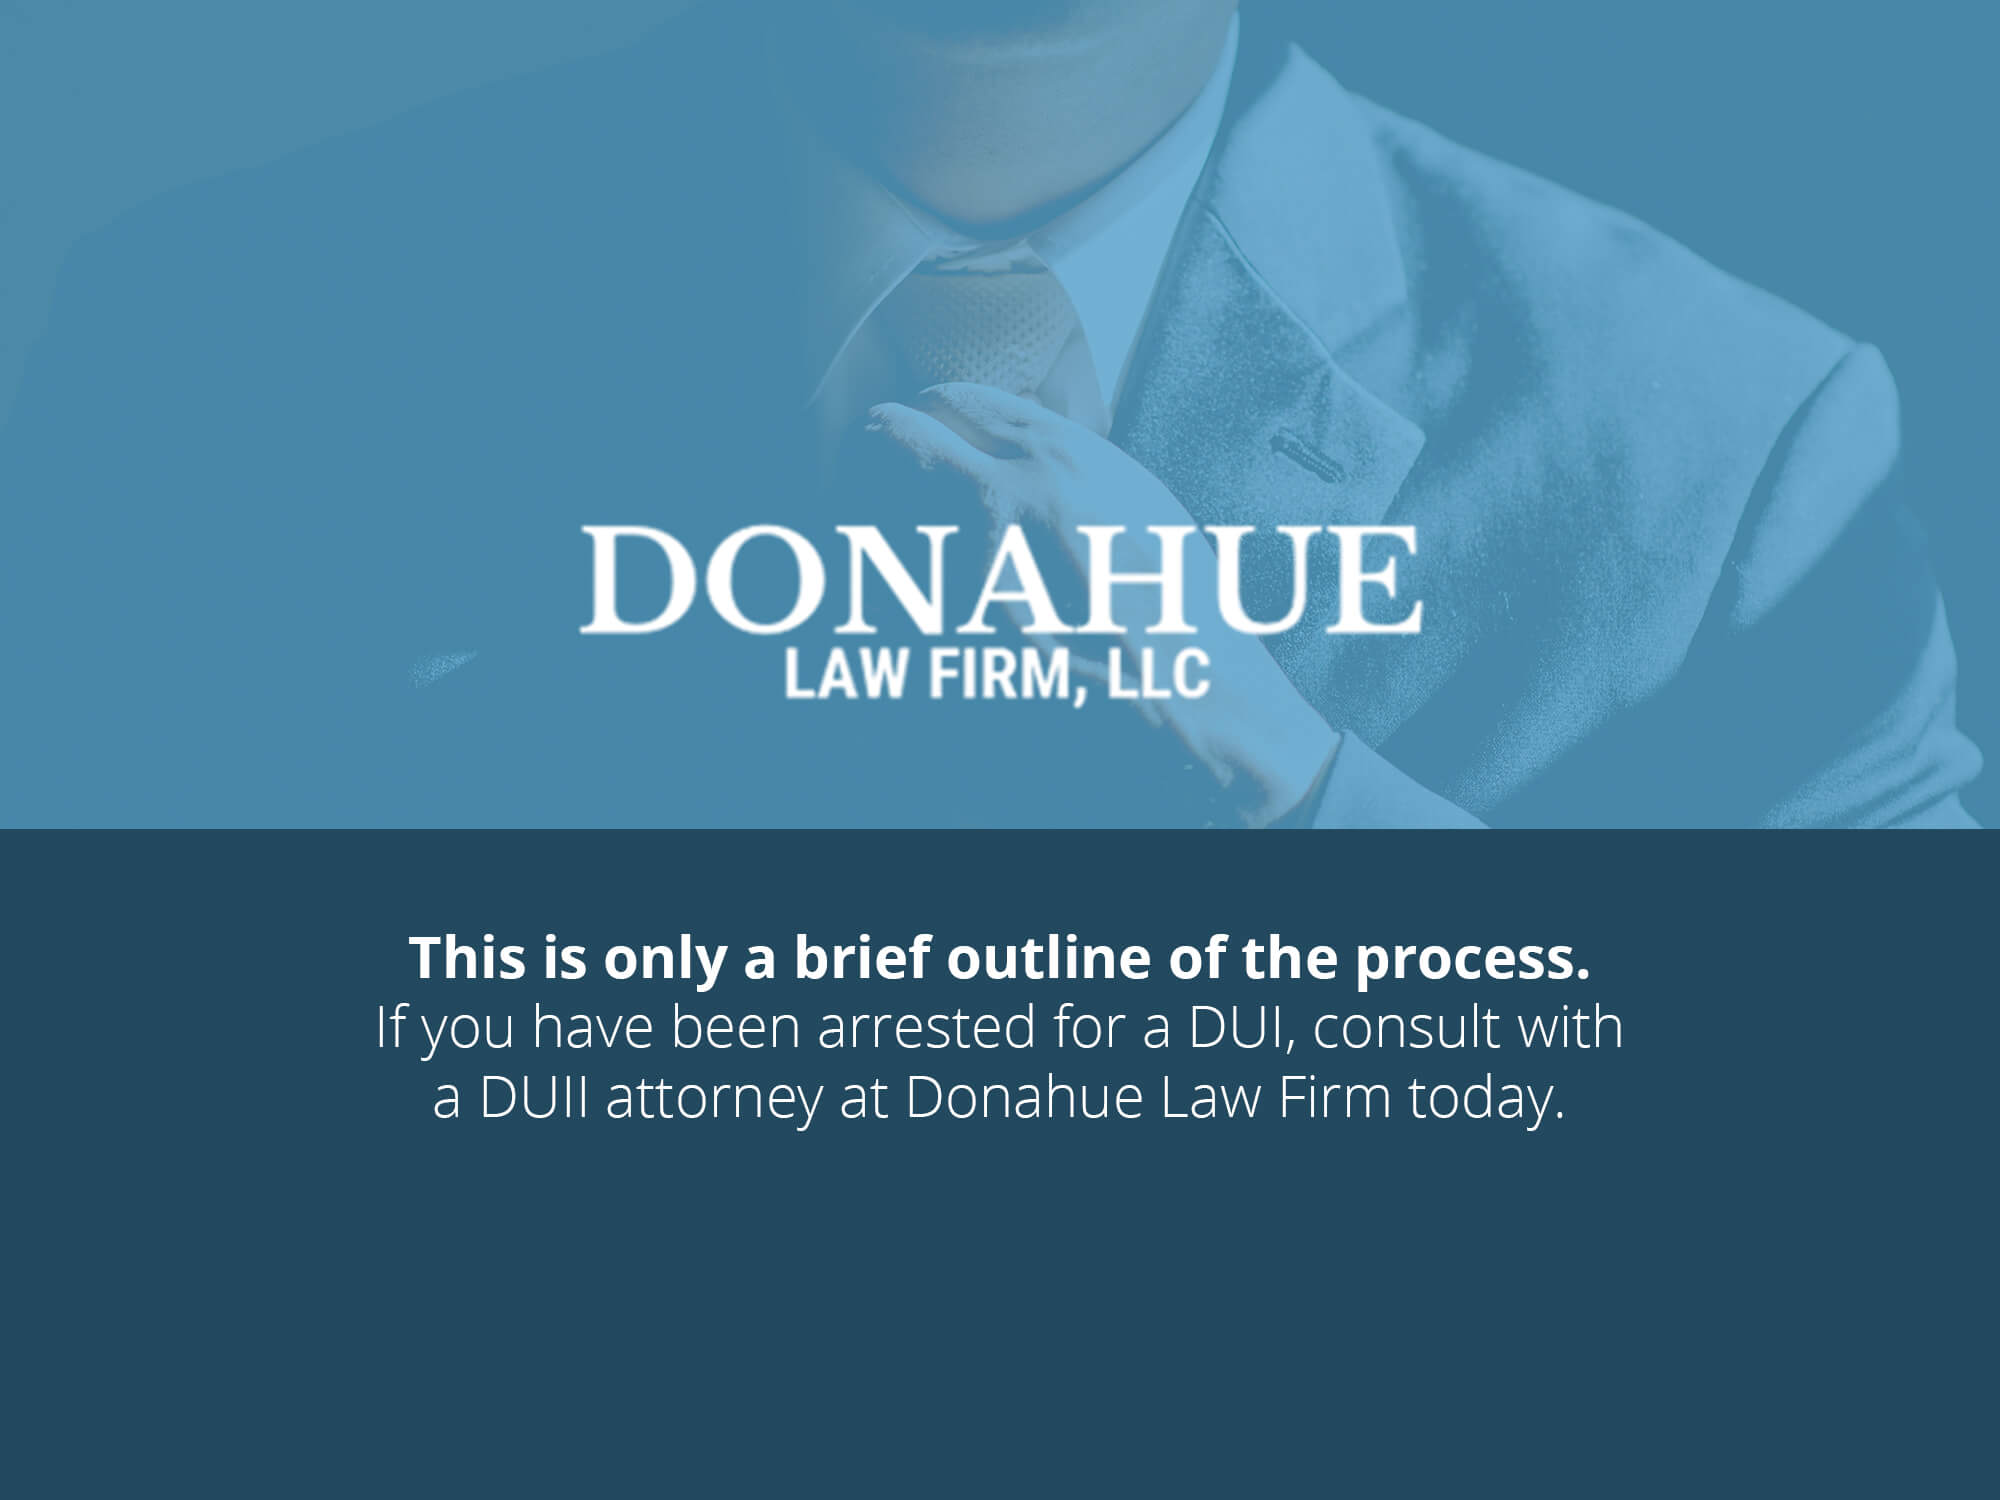 Donahue Law Firm